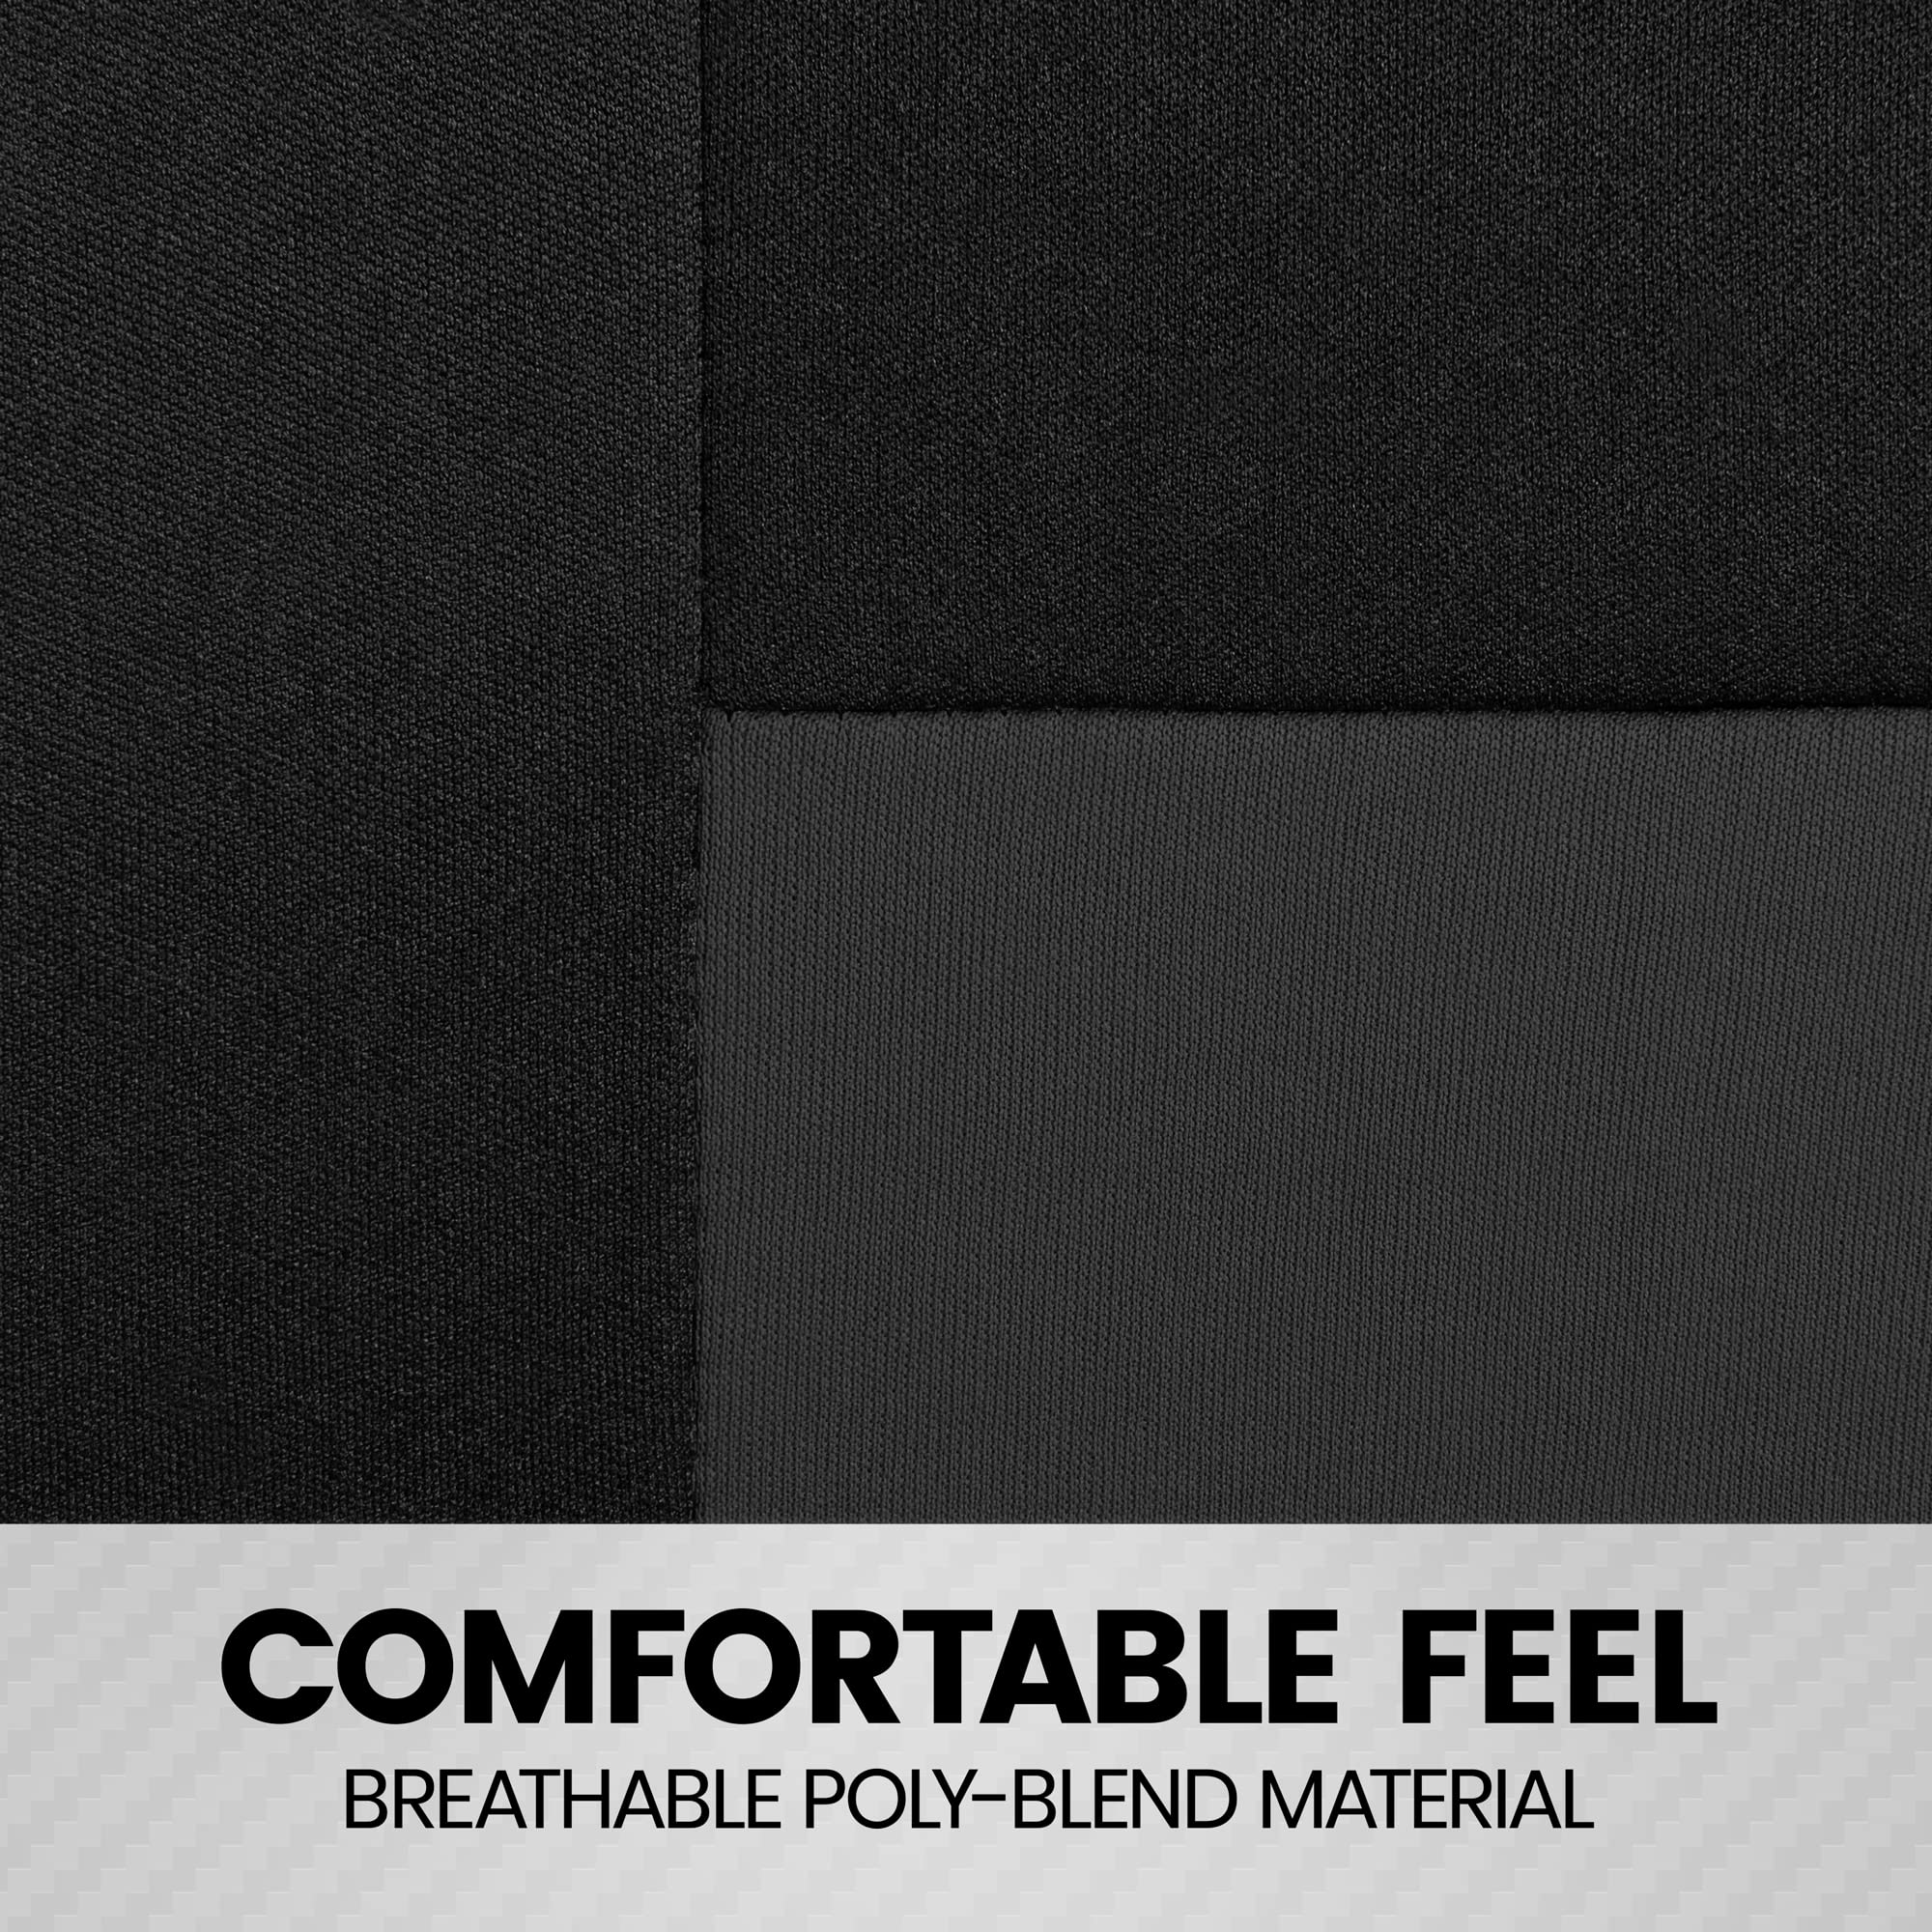 BDK PolyPro Car Seat Covers Full Set in Charcoal on Black – Front and Rear Split Bench Seat Covers for Cars, Easy to Install Car Seat Cover Set, Car Accessories for Auto Trucks Van SUV